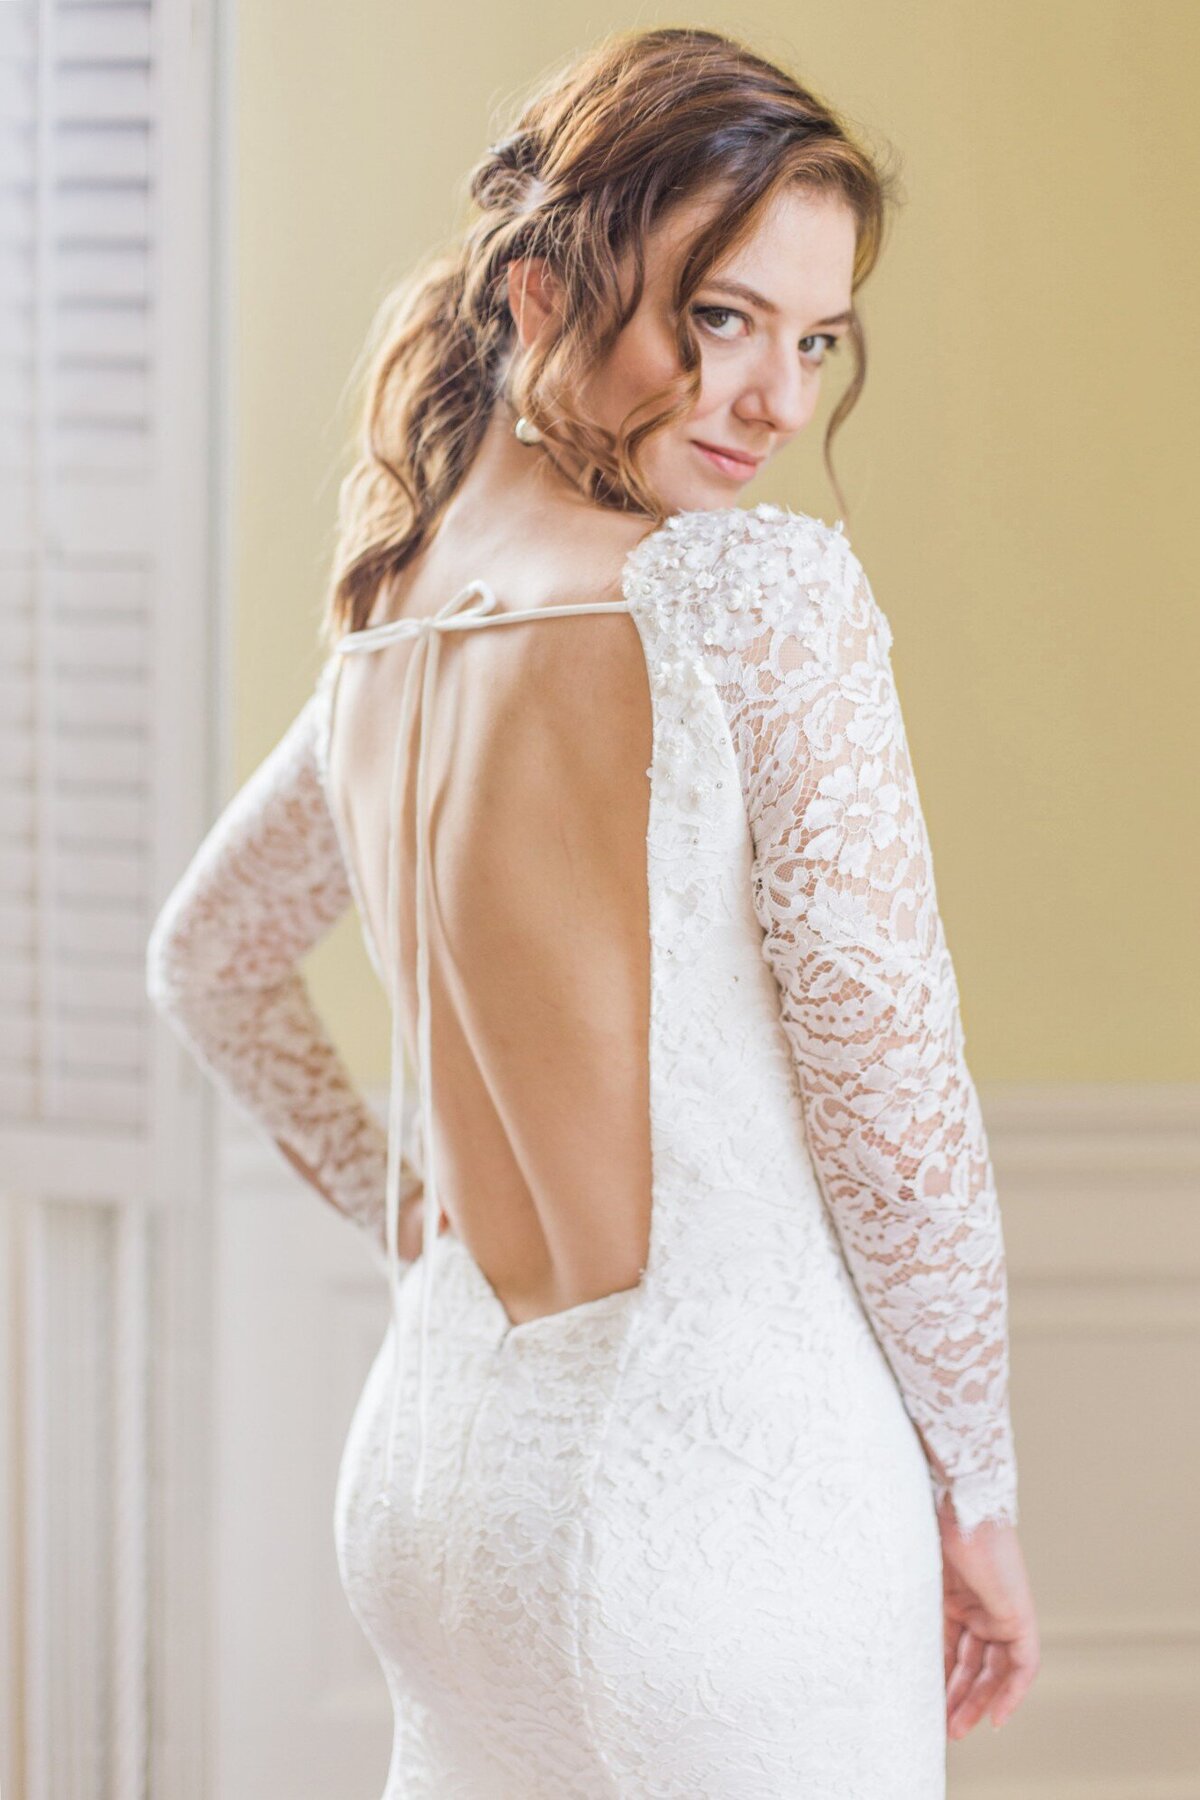 The low open back contrasts with the bateau neckline on this wedding dress style. A pair of ties at shoulder level tied into a bow keep the dress from sliding off the shoulders.